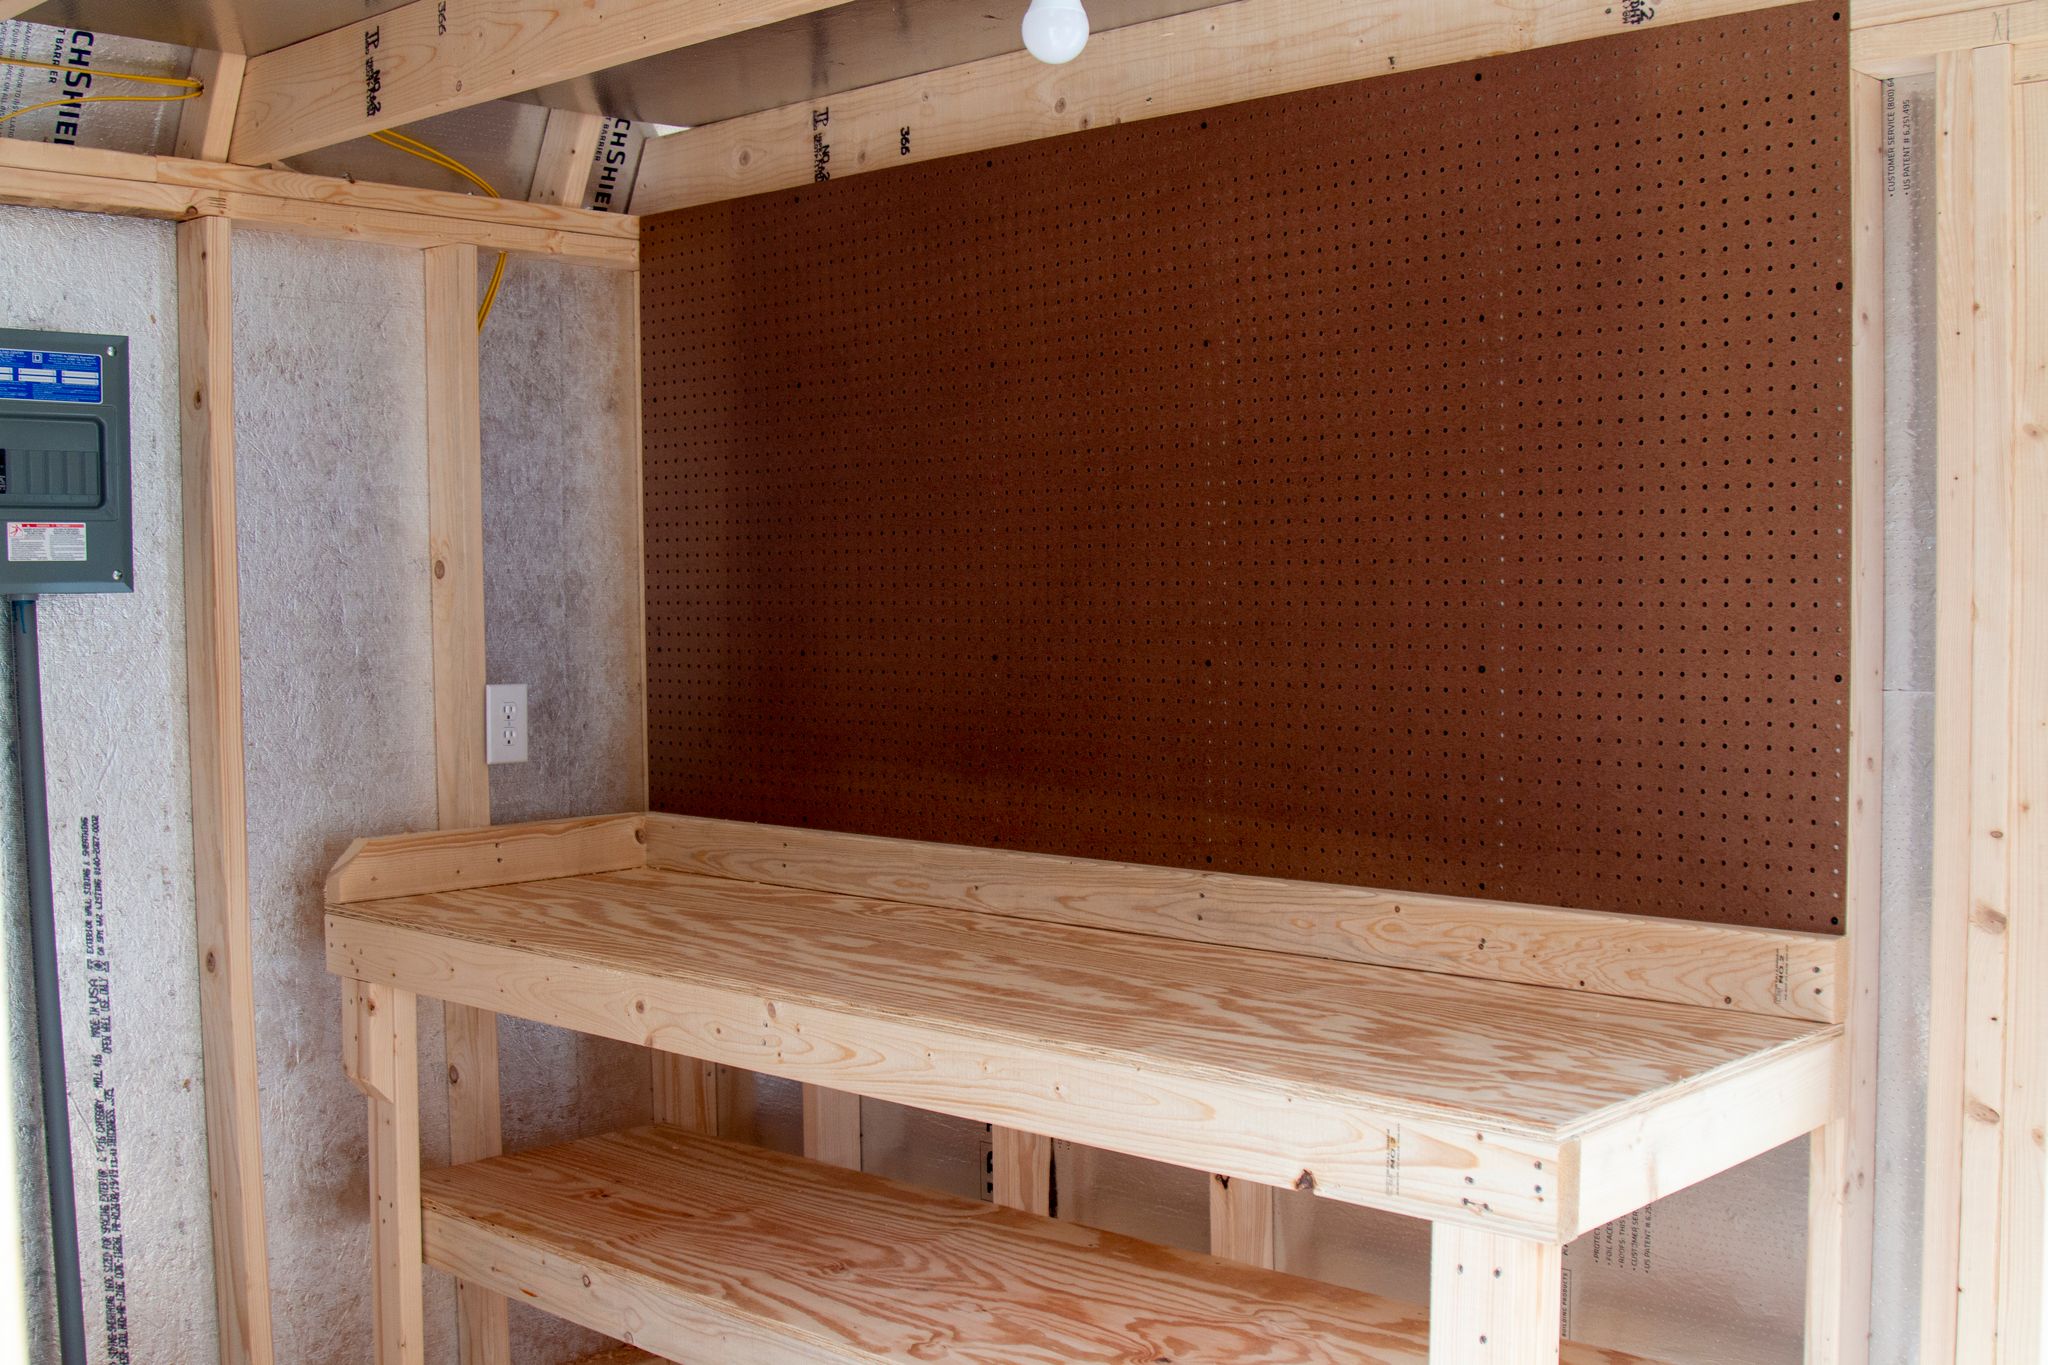 Westwood's Handyman Package includes a 6' workbench and pegboard for additional workshop capabilities.